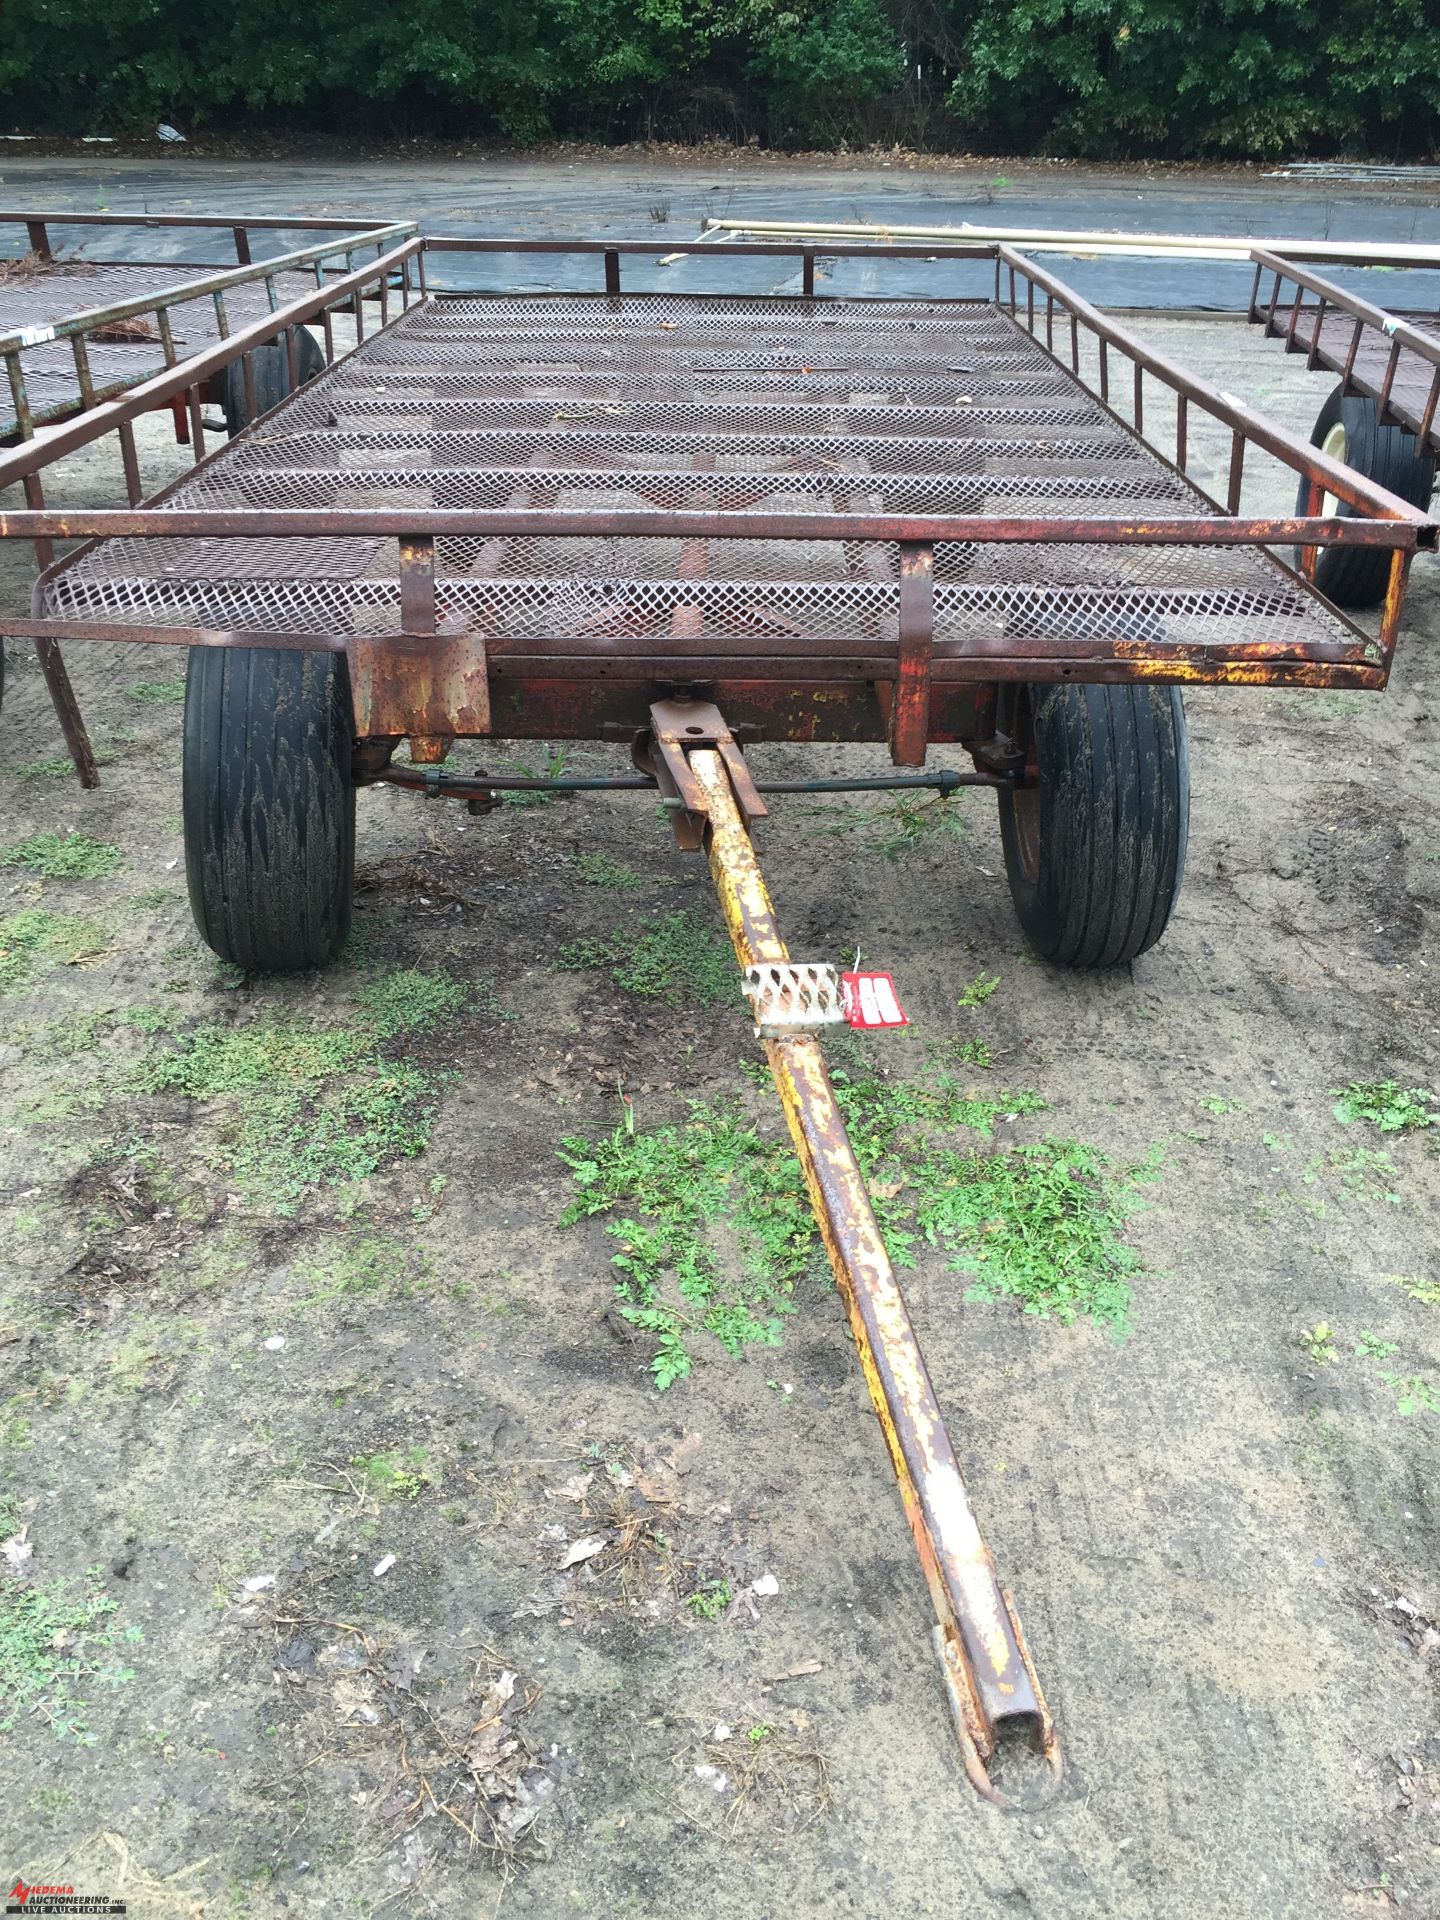 FLATBED WAGON, FIFTH WHEEL STYLE STEERING, 7' WIDE x 14' LONG, METAL DECK, FOR FARM USE ONLY [